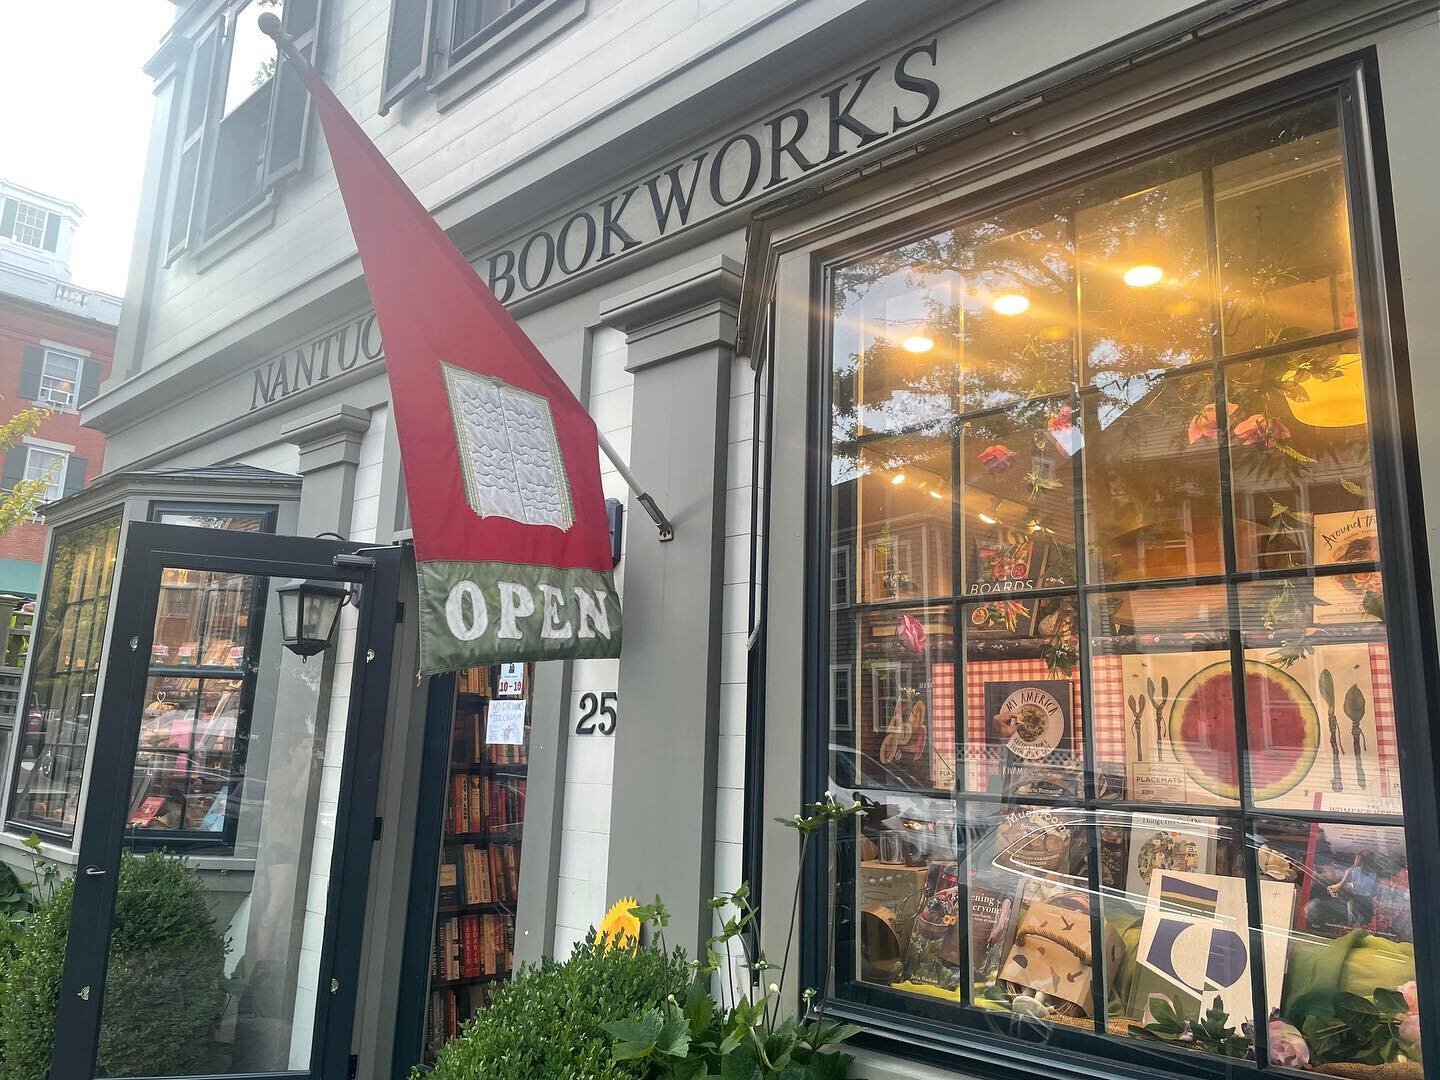 My secret wish has been answered! Nantucket Bookworks has a copy of my book From Collage to Quilt in their window! I&rsquo;m absolutely thrilled!

Why? Well, I must go back to the mid 70&rsquo;s and early 80&rsquo;s. My Father always ordered his art 